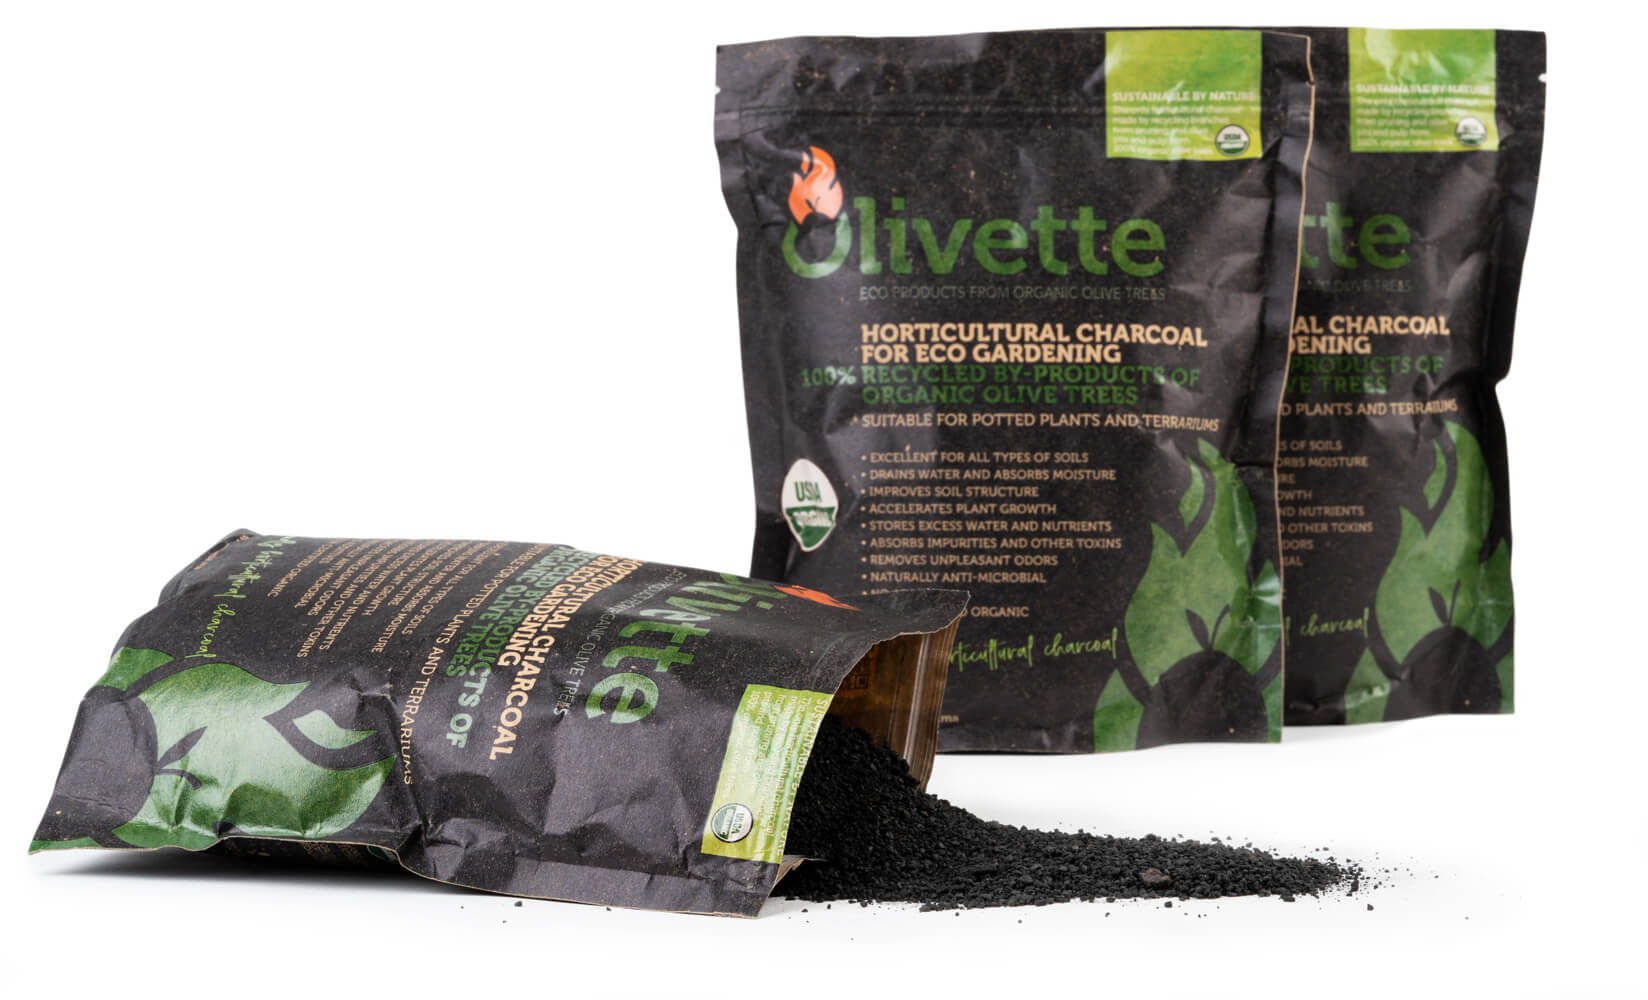 Horticultural charcoal for eco gardening